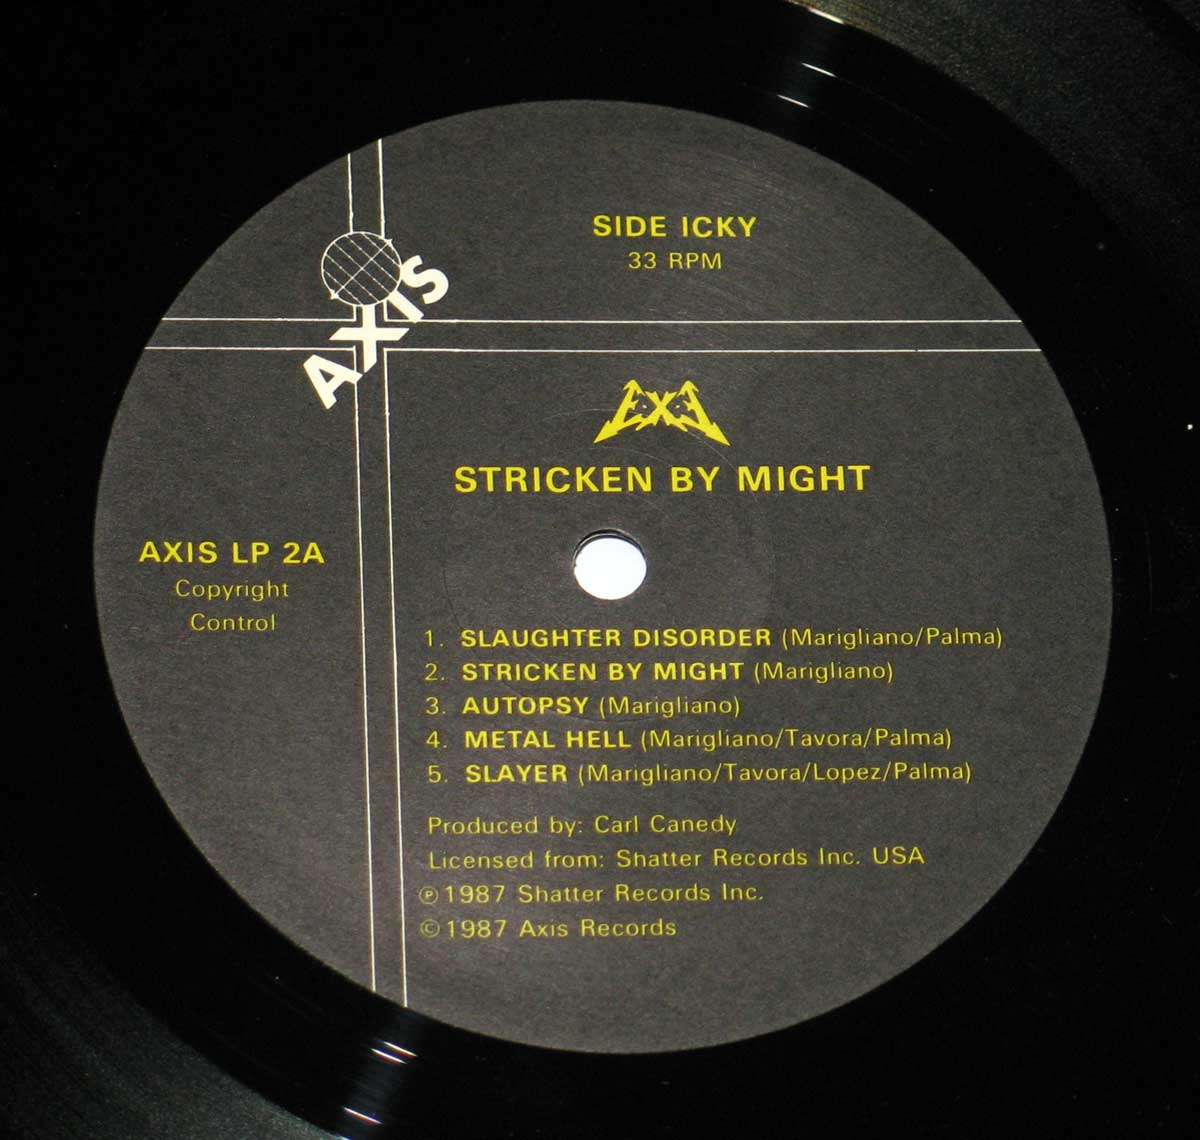 Close-up Photo of "EXE - Stricken by Might" Record Label  

